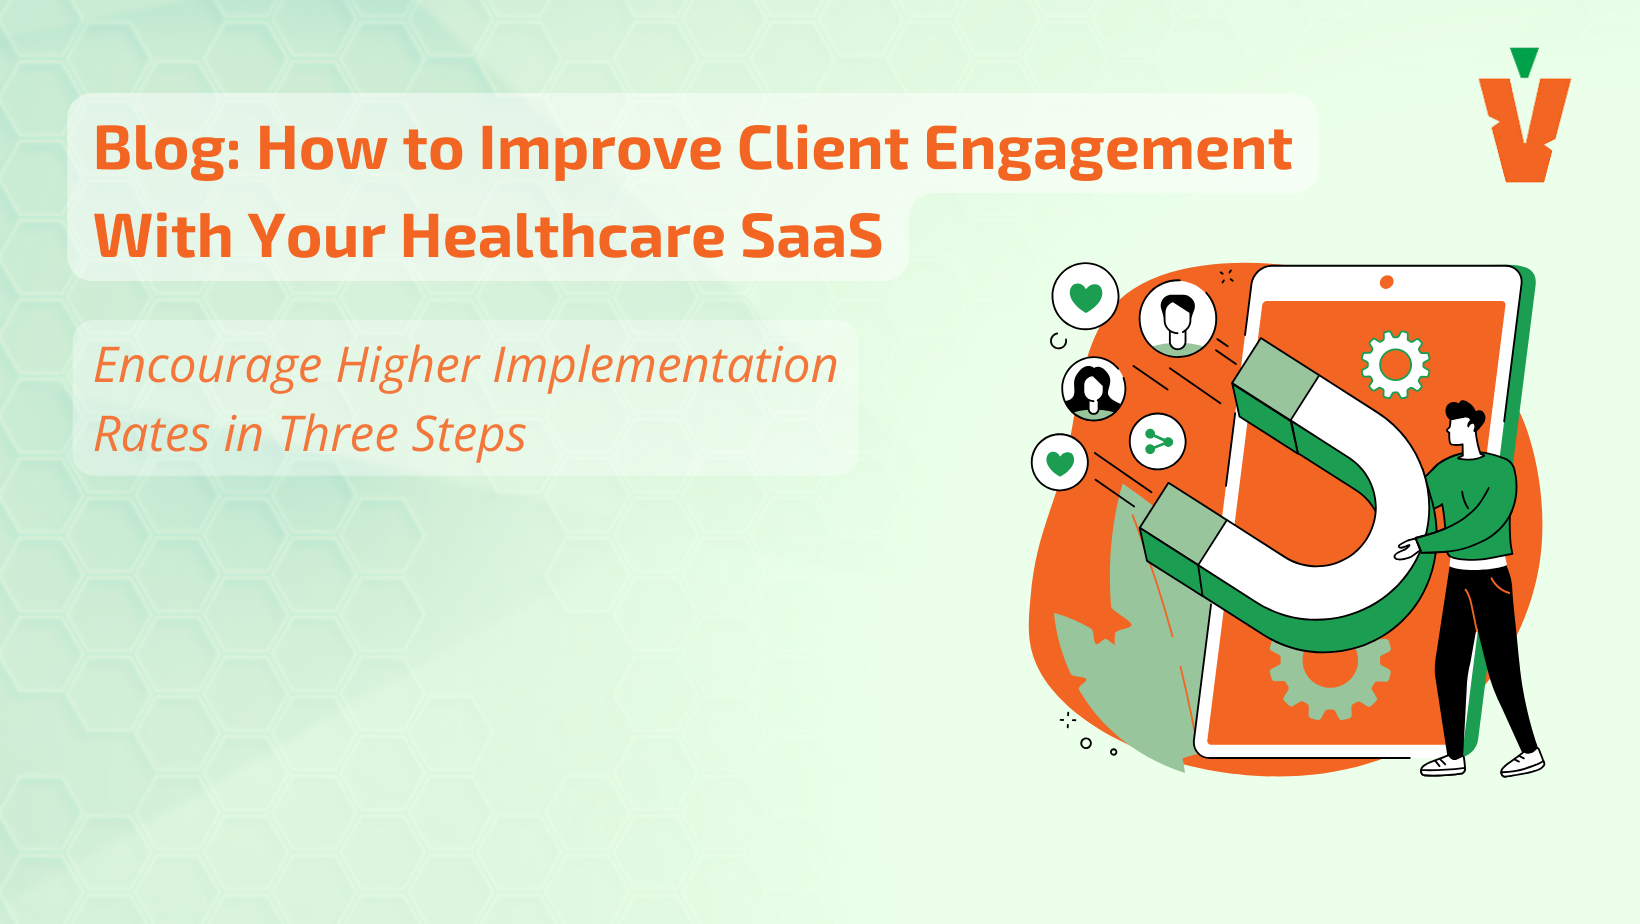 How to Improve Client Engagement With Your Healthcare SaaS